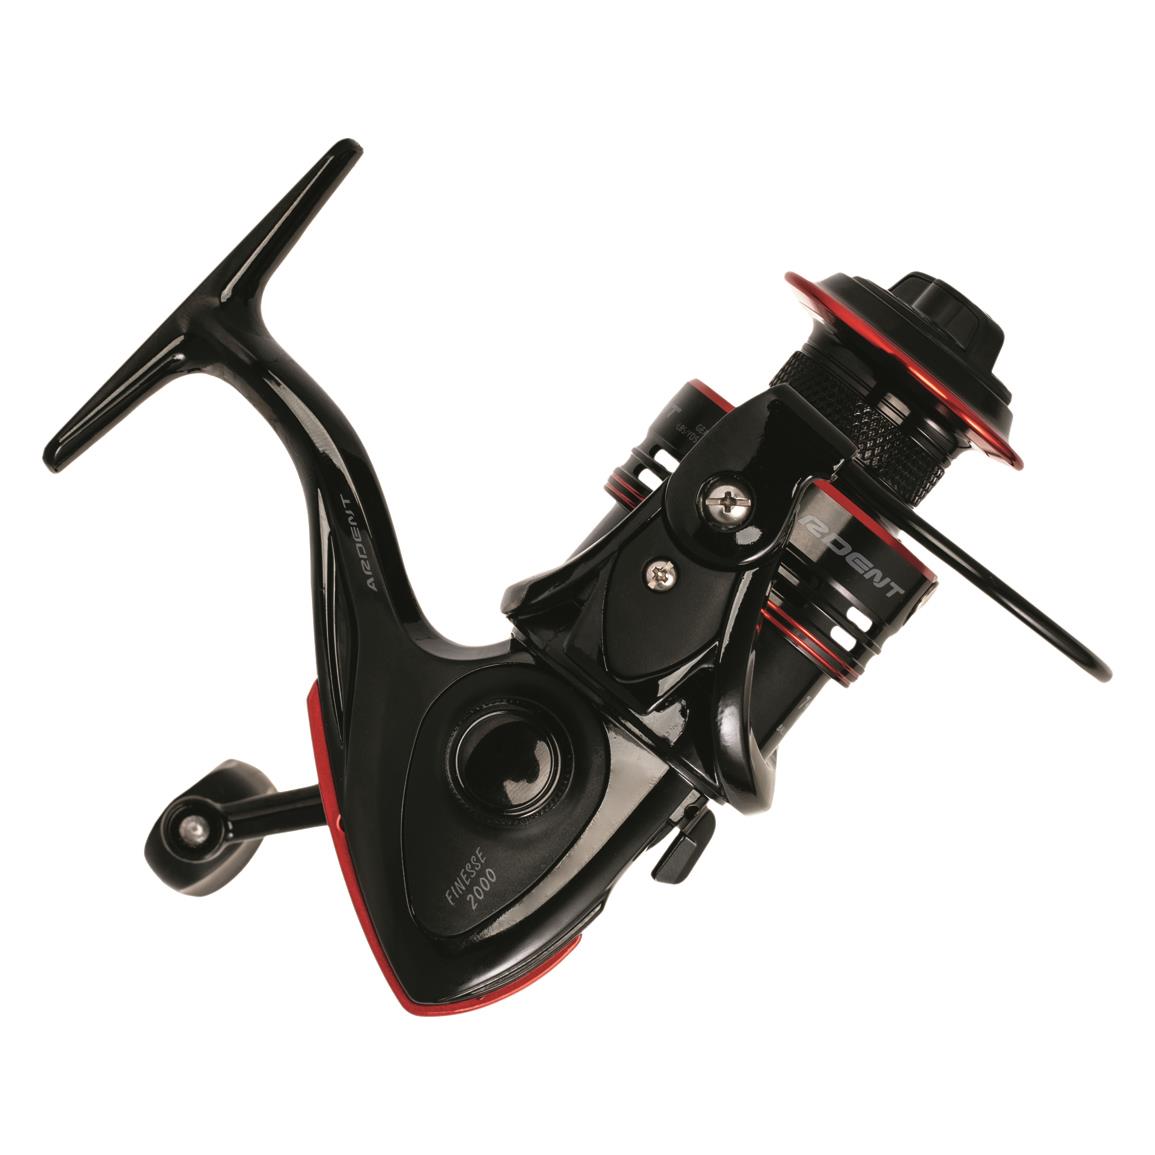 Shimano Nasci FC Spinning Reel, 5.6:1 Gear Ratio, 500 Size Reel - 730511,  Spinning Reels at Sportsman's Guide